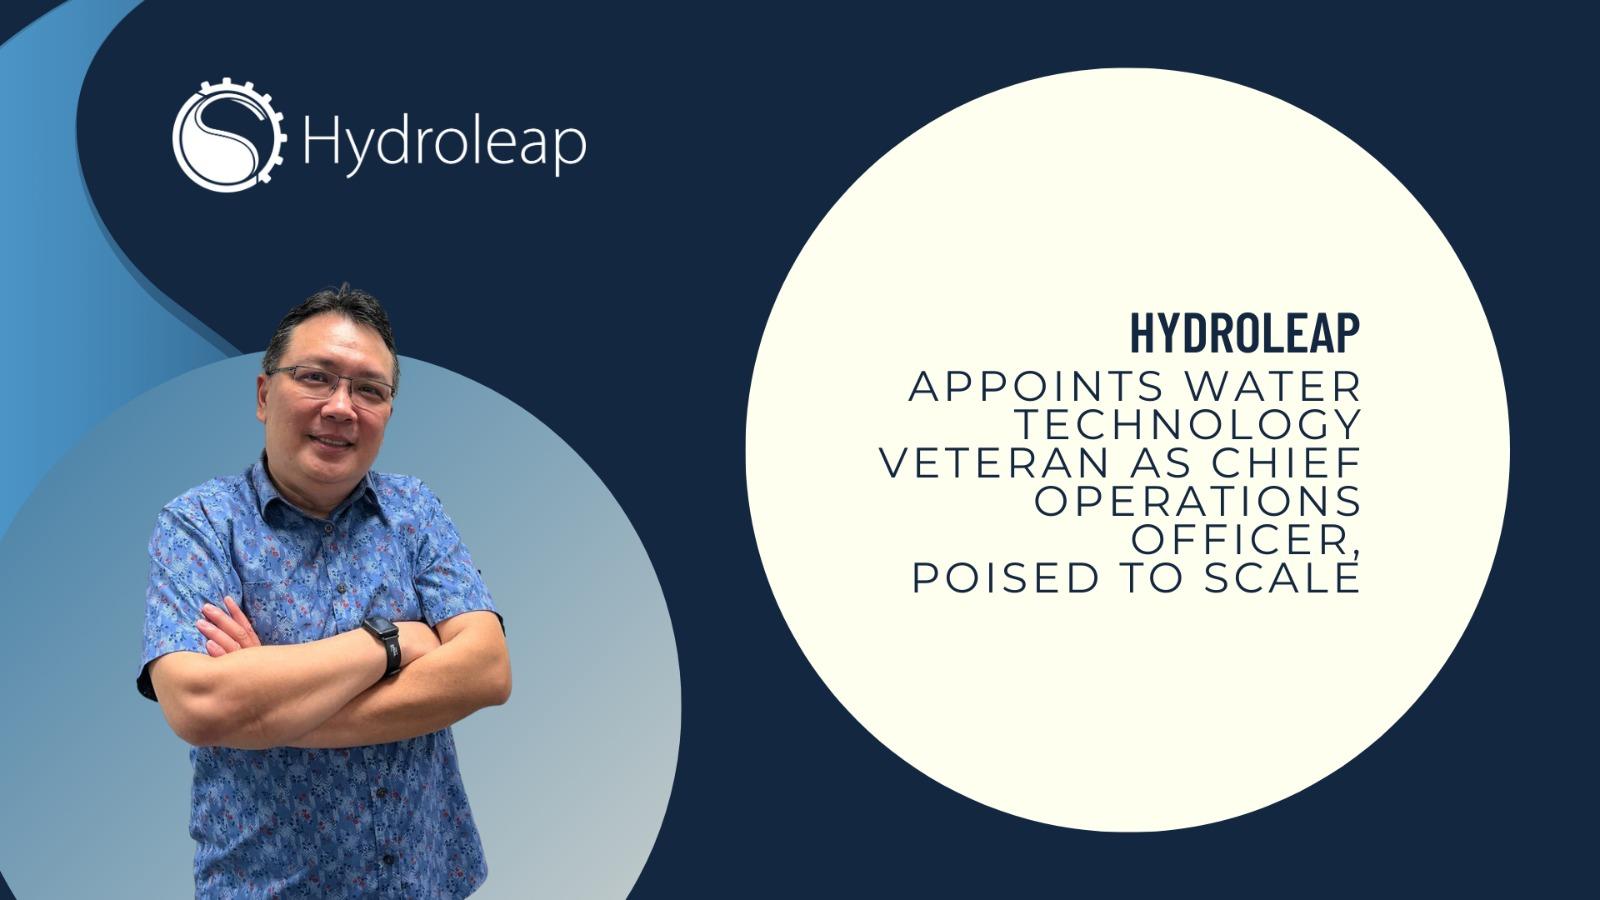 Featuring Allan Toh, Hydroleap's newly appointed Chief Operating Officer.